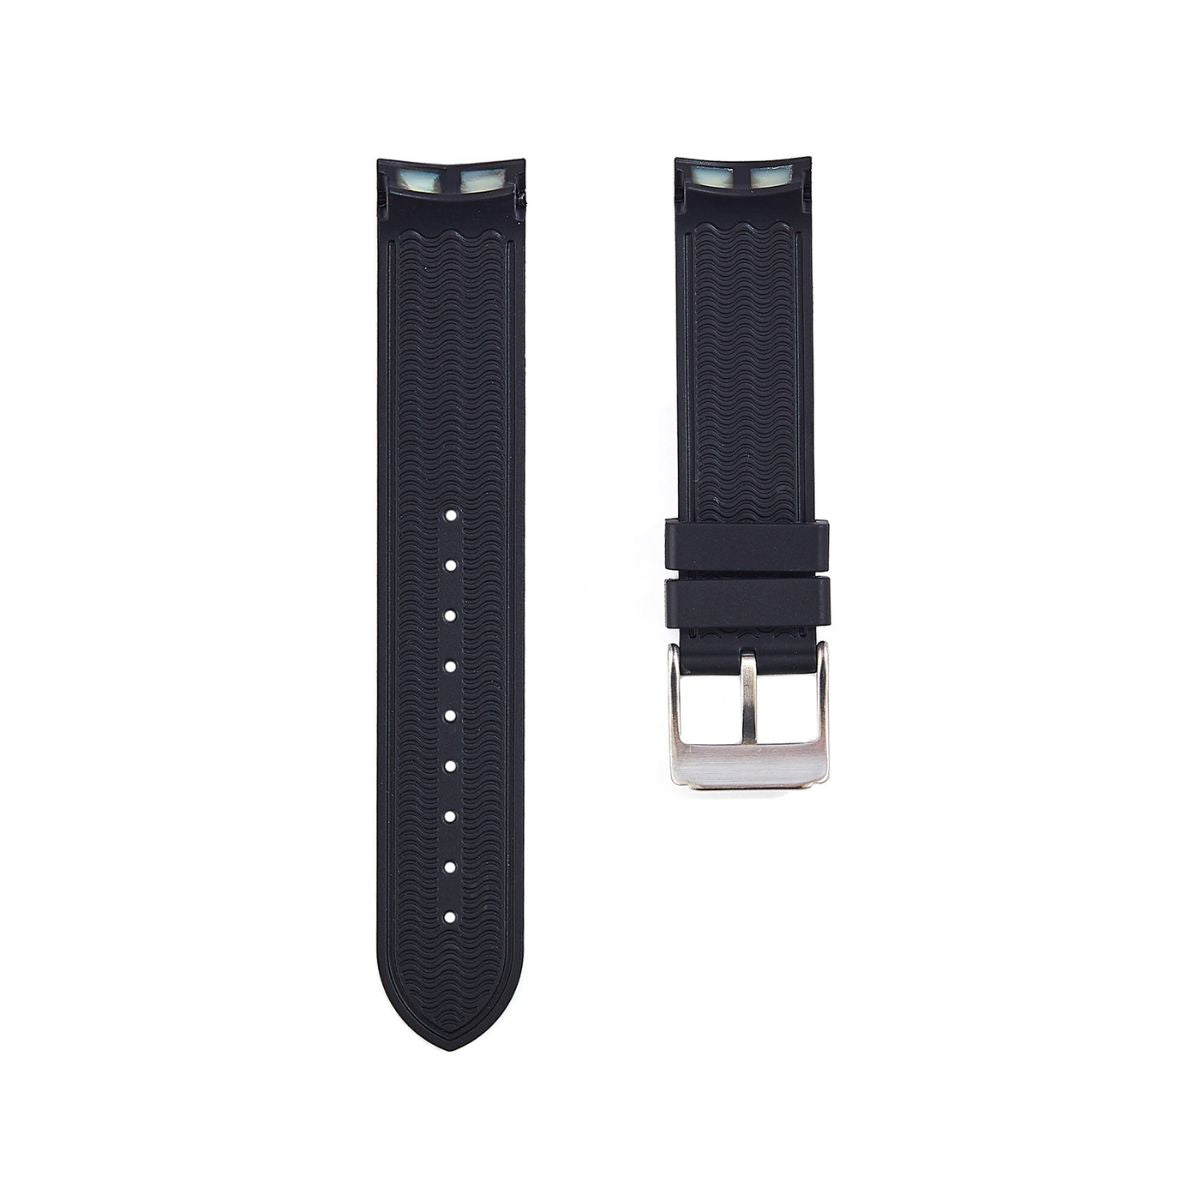 Paramount Curved End Premium Silicone Strap - Compatible with Omega Moonwatch - Black -StrapSeeker